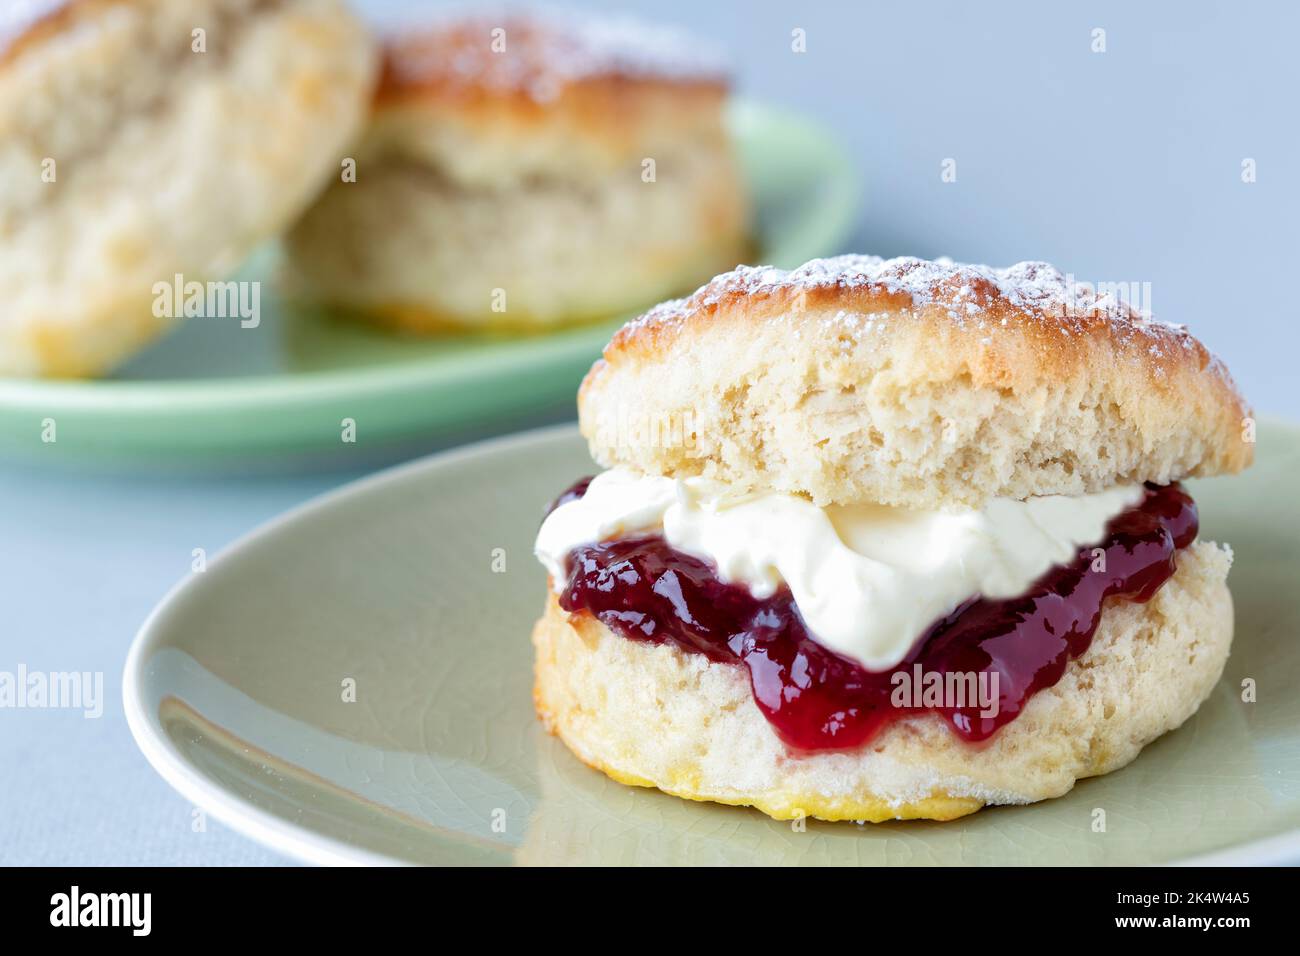 A fresh traditional English home made scone. The cake is split and filled with jam and topped with thick clotted cream. A delicious Cornish cream tea. Stock Photo